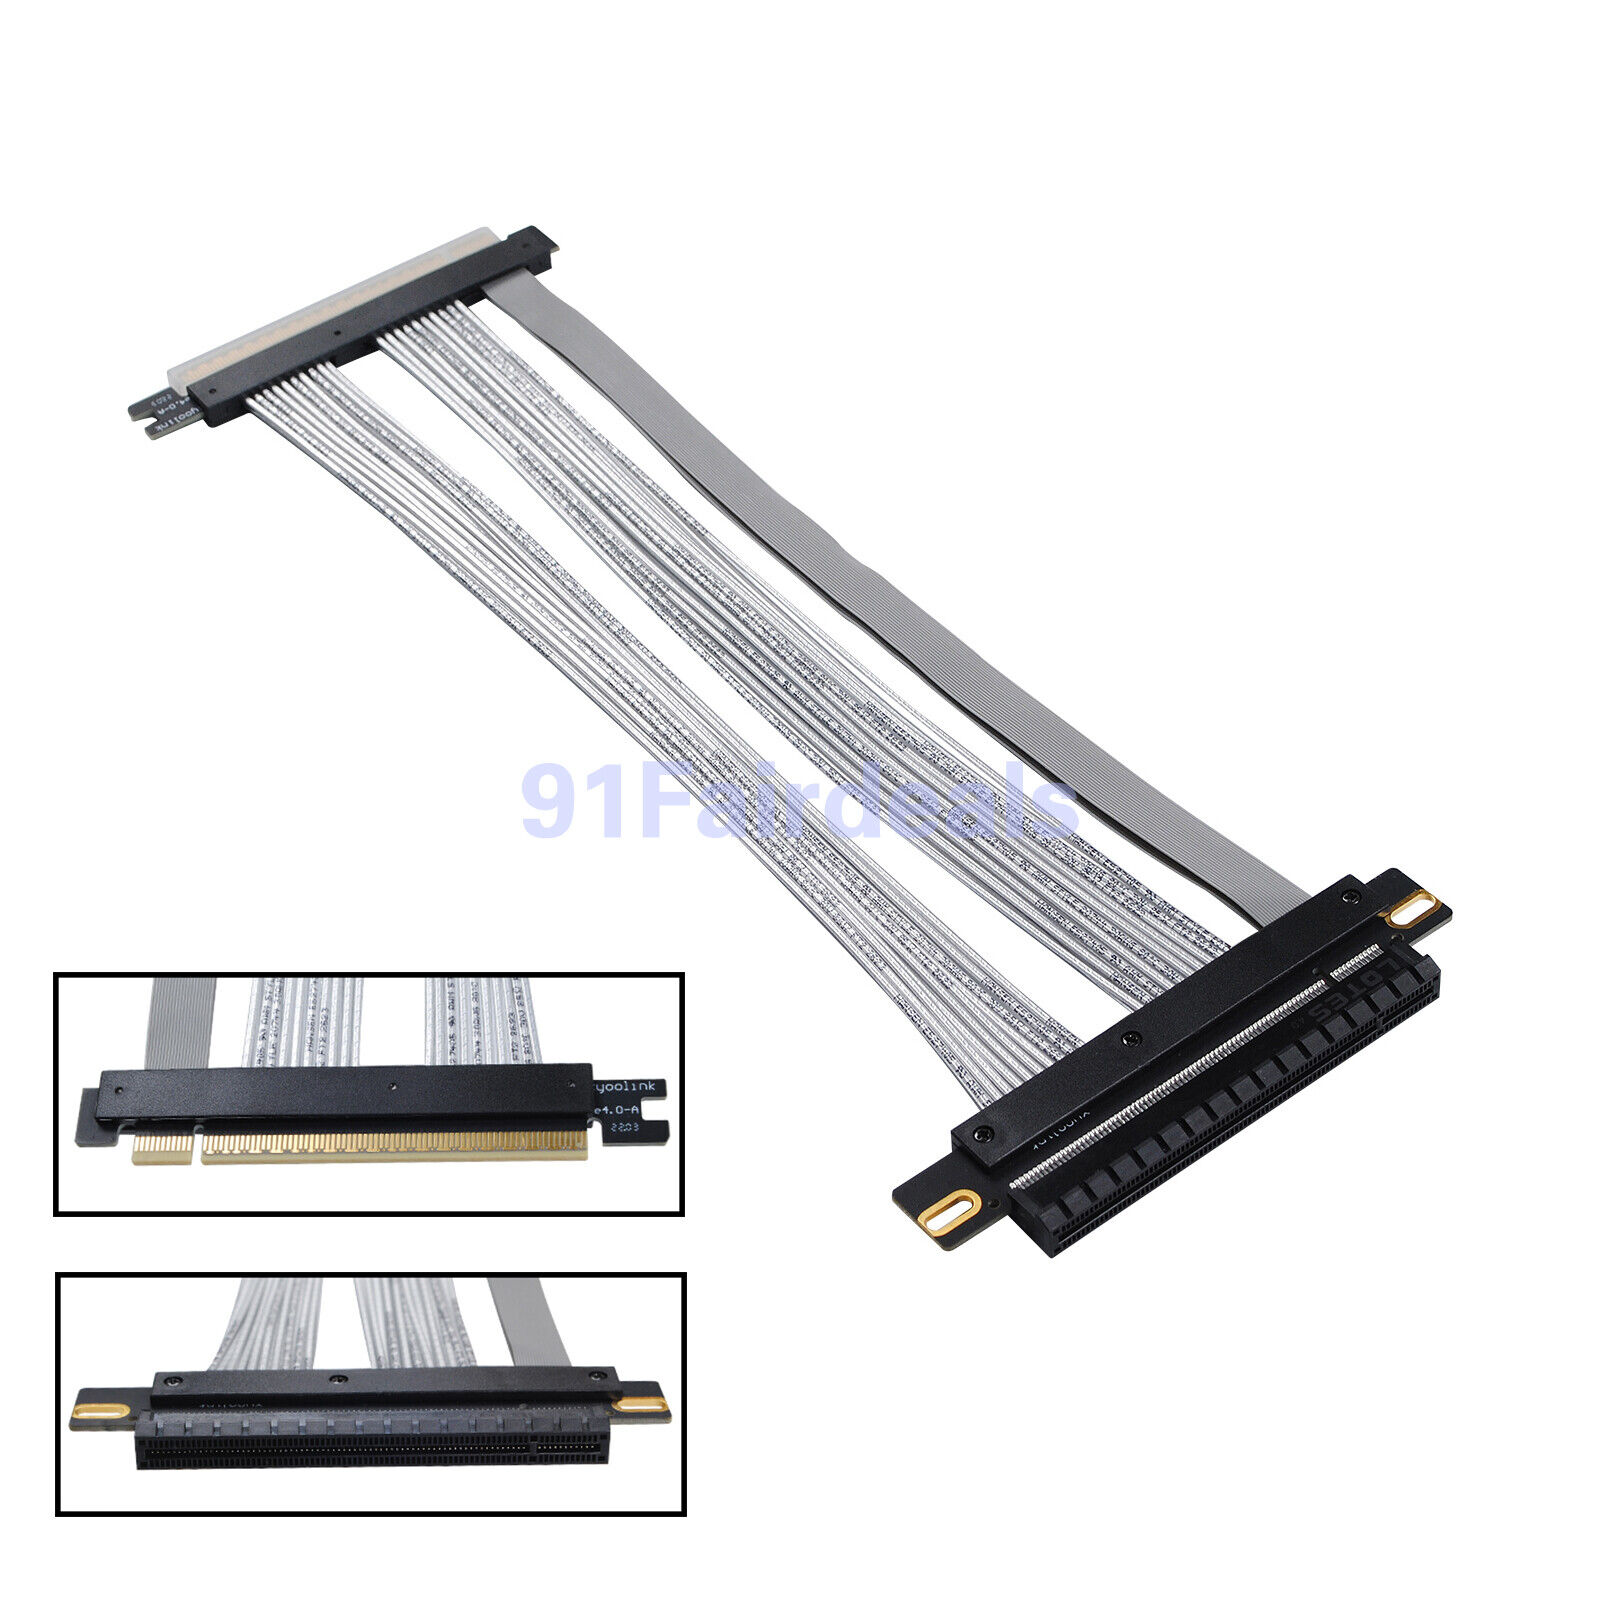 PCIE 4.0 X16 Riser Cable High Speed Flexible Double Sided 180 Degree GPU 